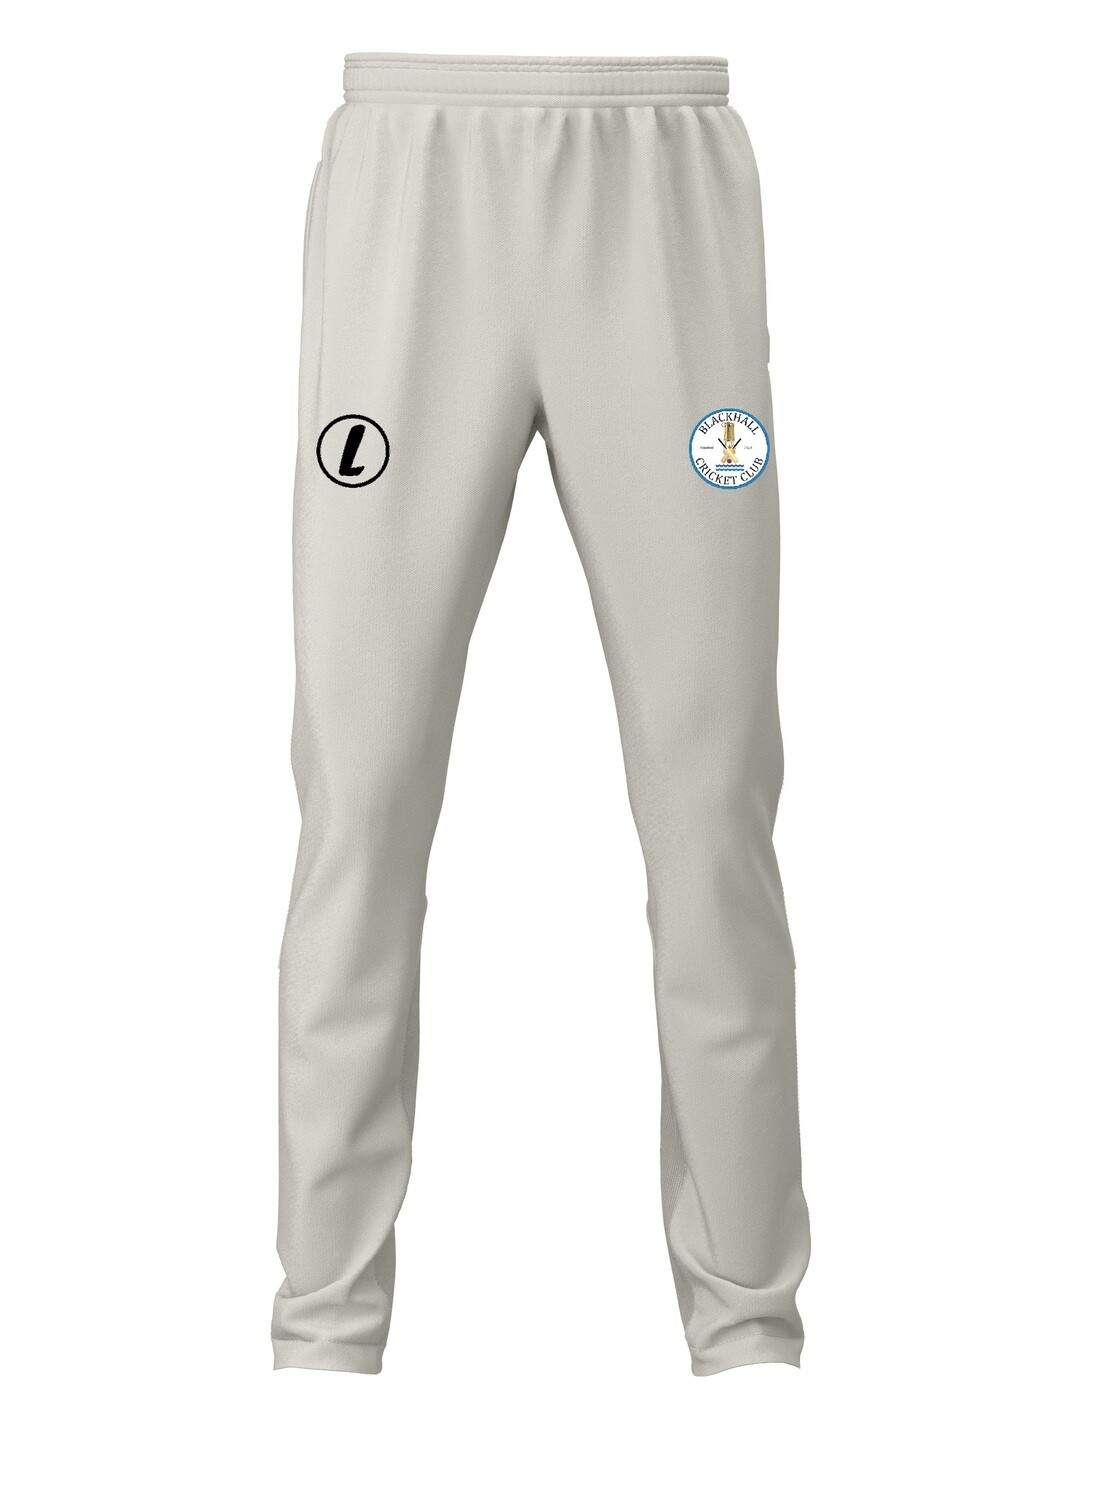 Blackhall Colliery Radial Cricket Trousers